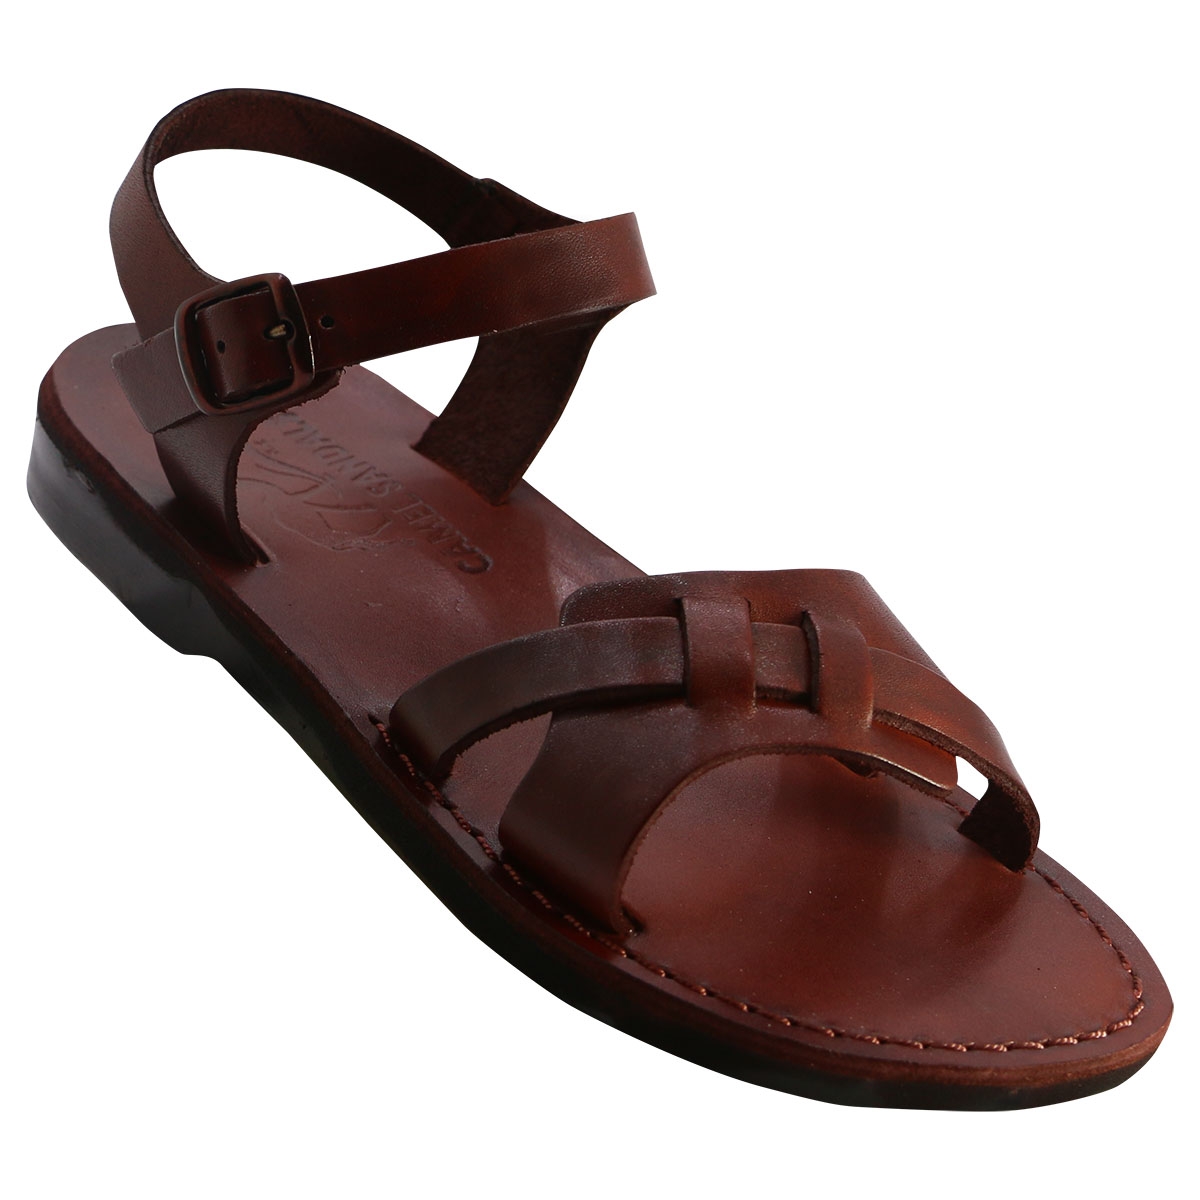 Moriah Handmade Leather Women's Sandals (Choice of Colors) - 1